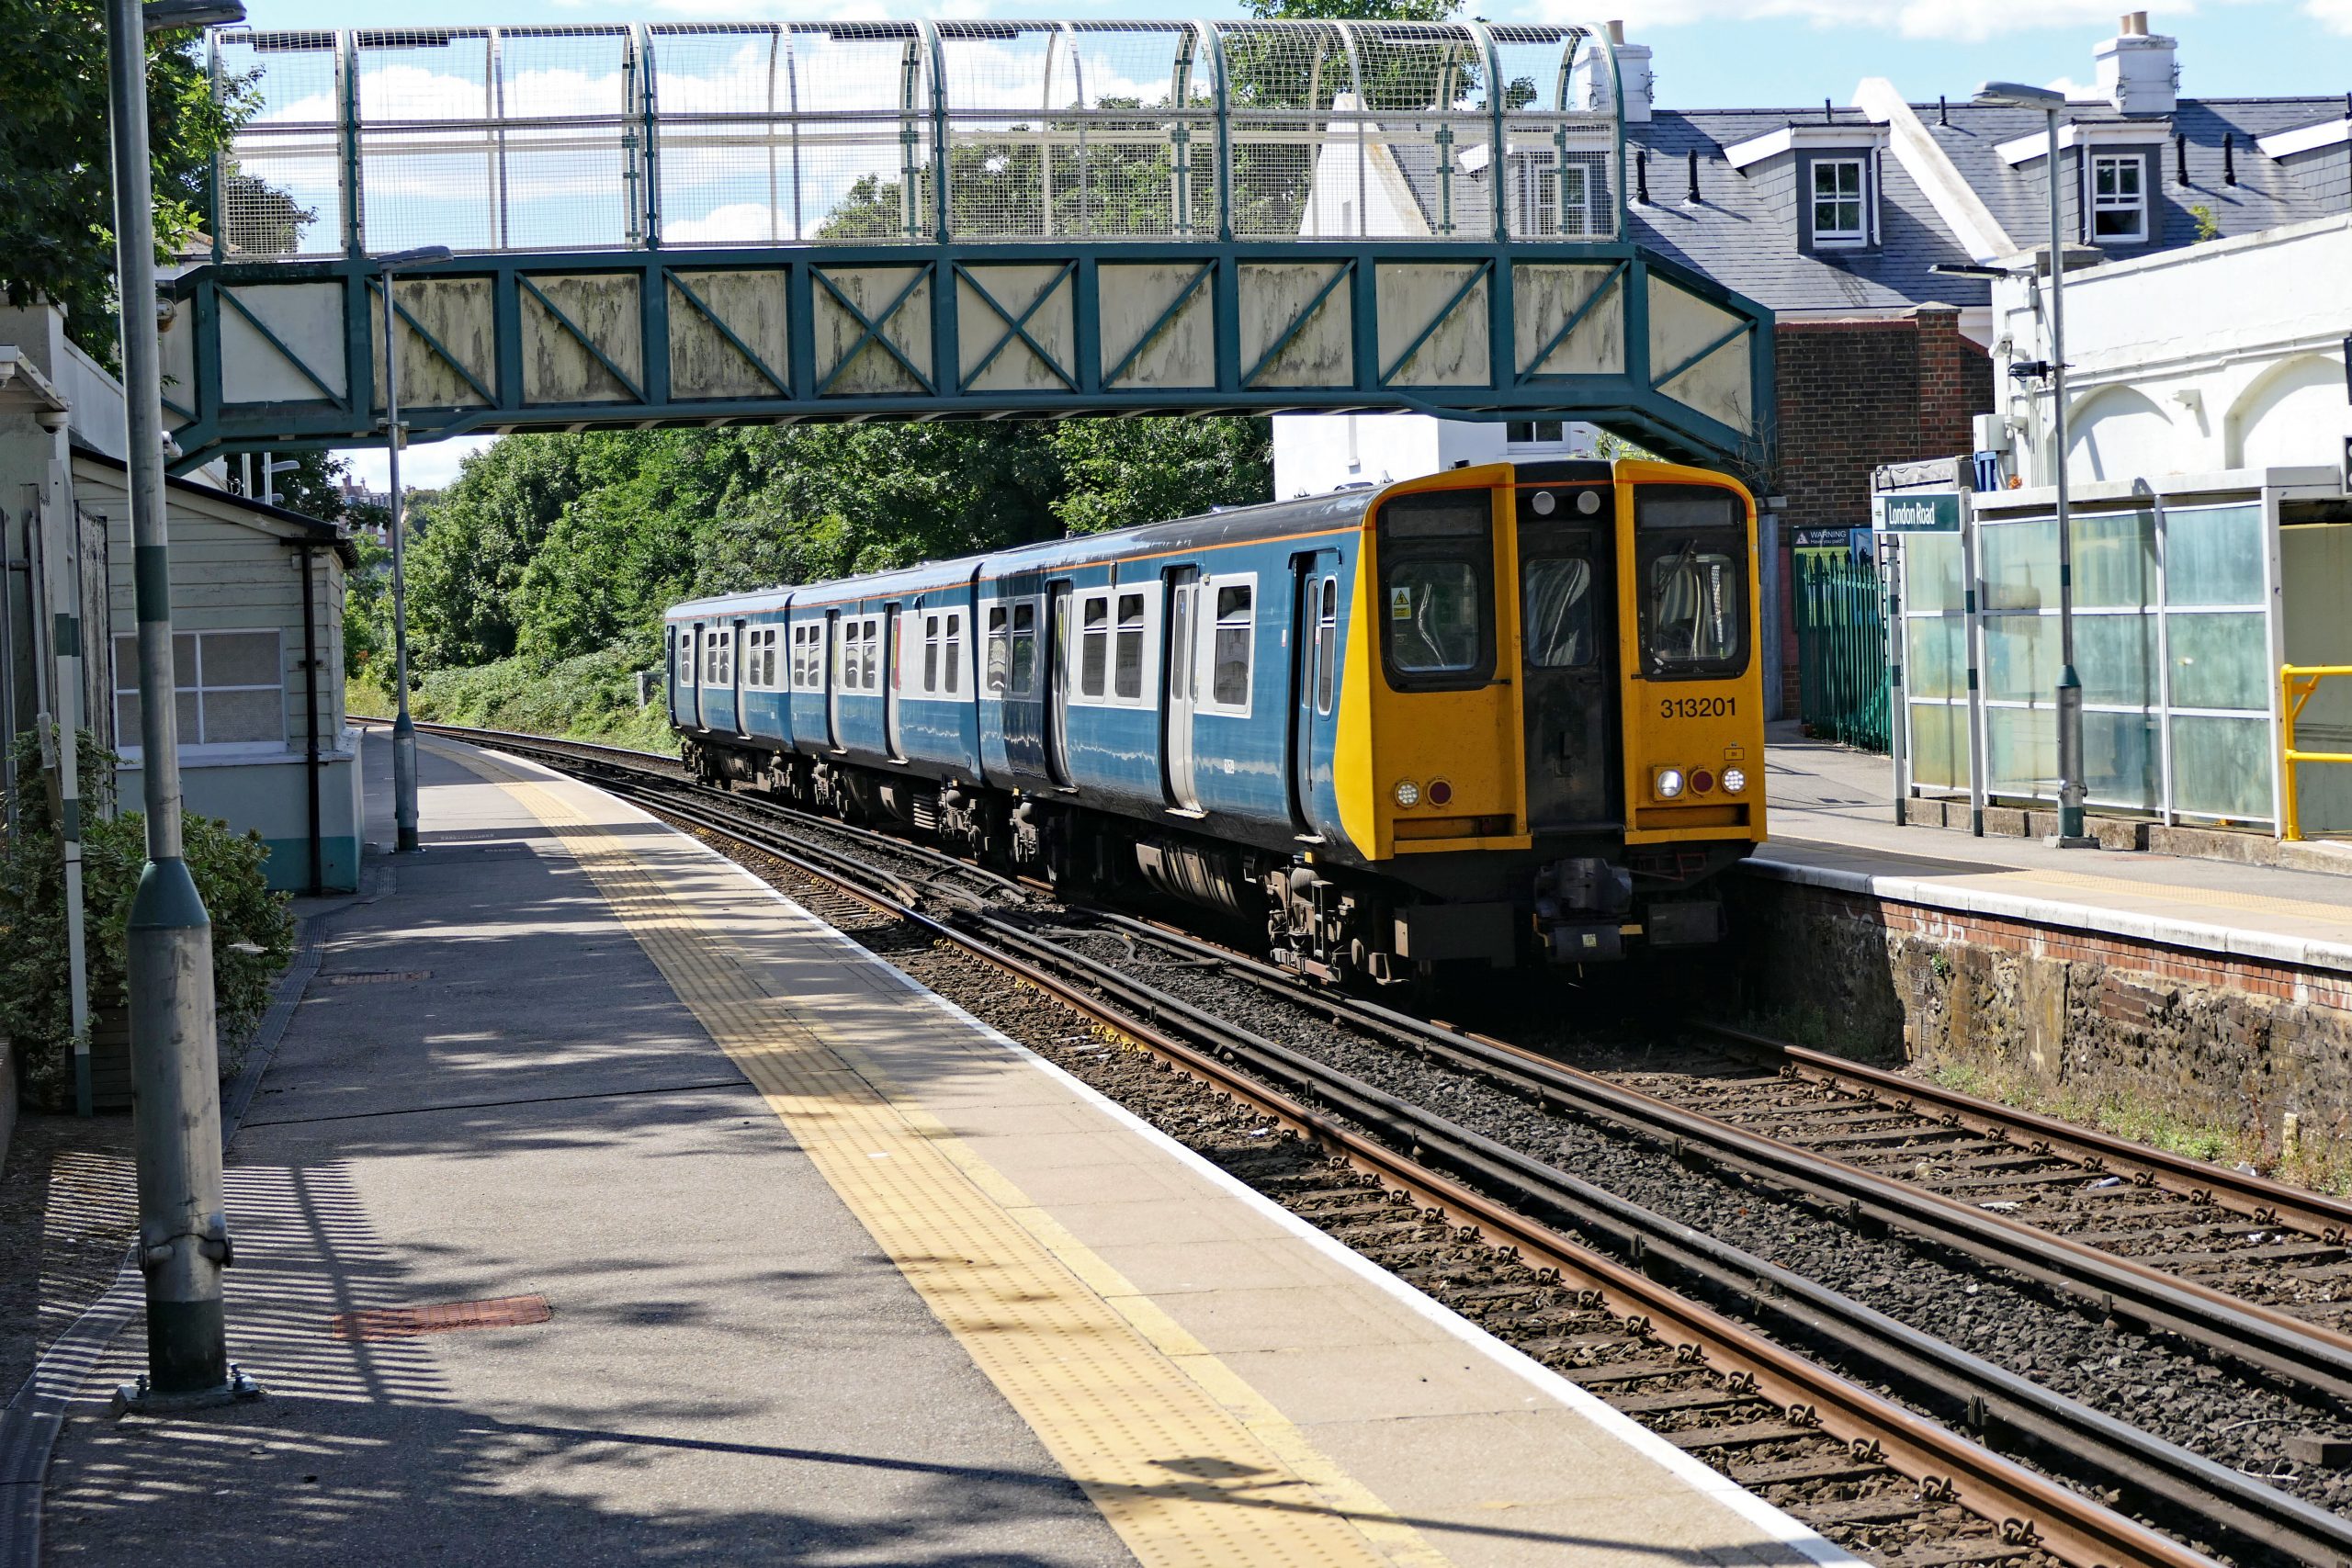 313 201 approaches London Road Brighton on the 14:41 Brighton to Seaford service. 05 August 2022.